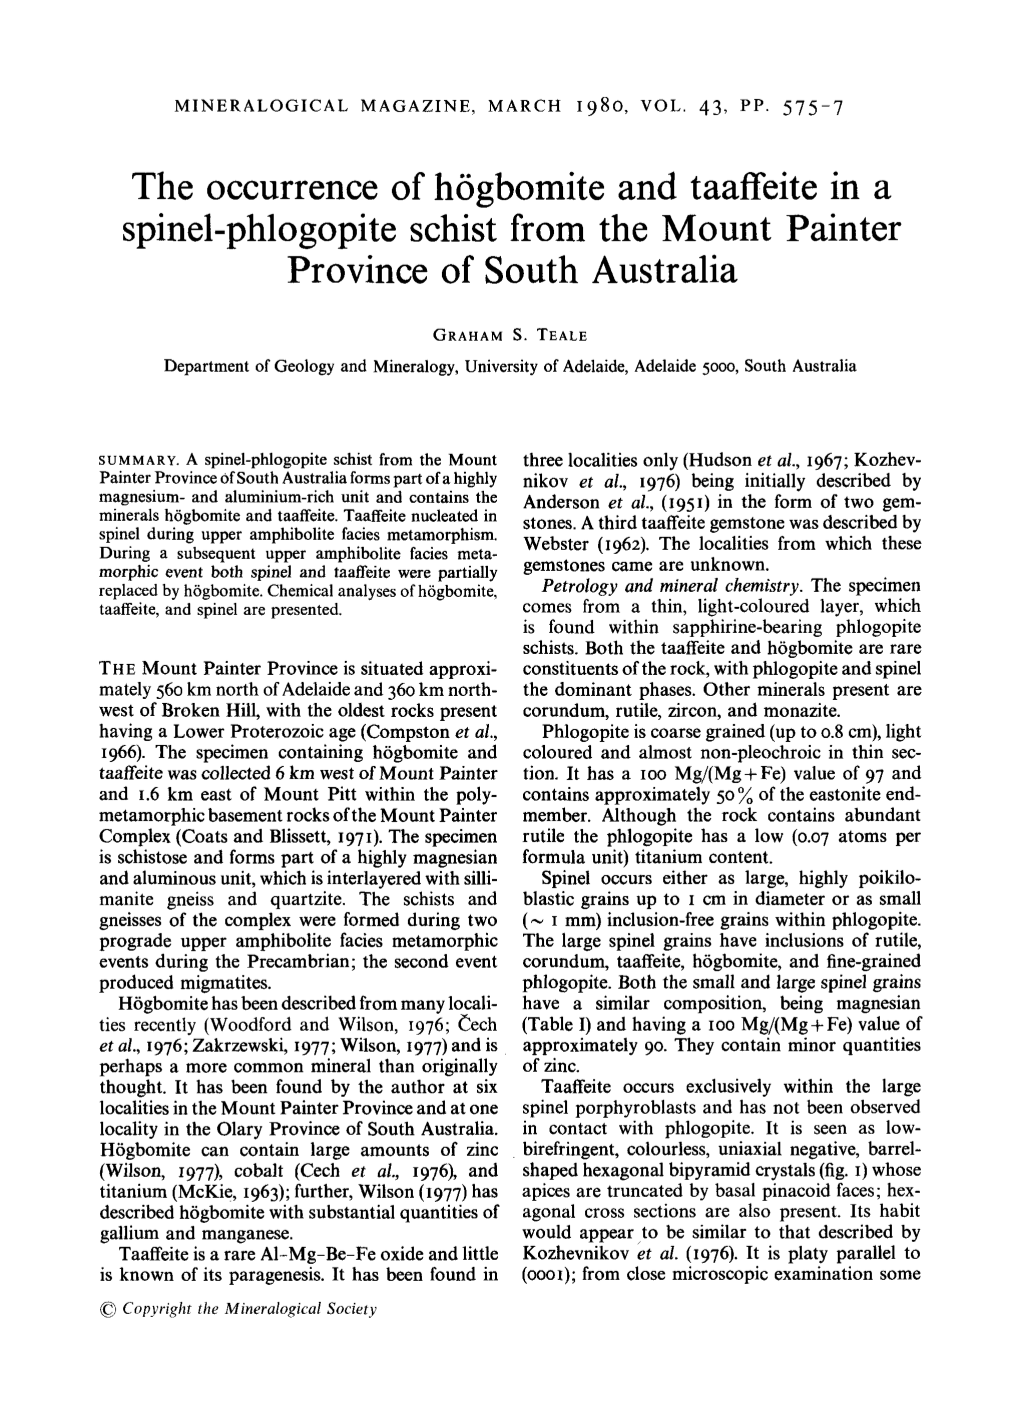 The Occurrence of H6gbomite and Taaffeite in a Spinel-Phlogopite Schist from the Mount Painter Province of South Australia